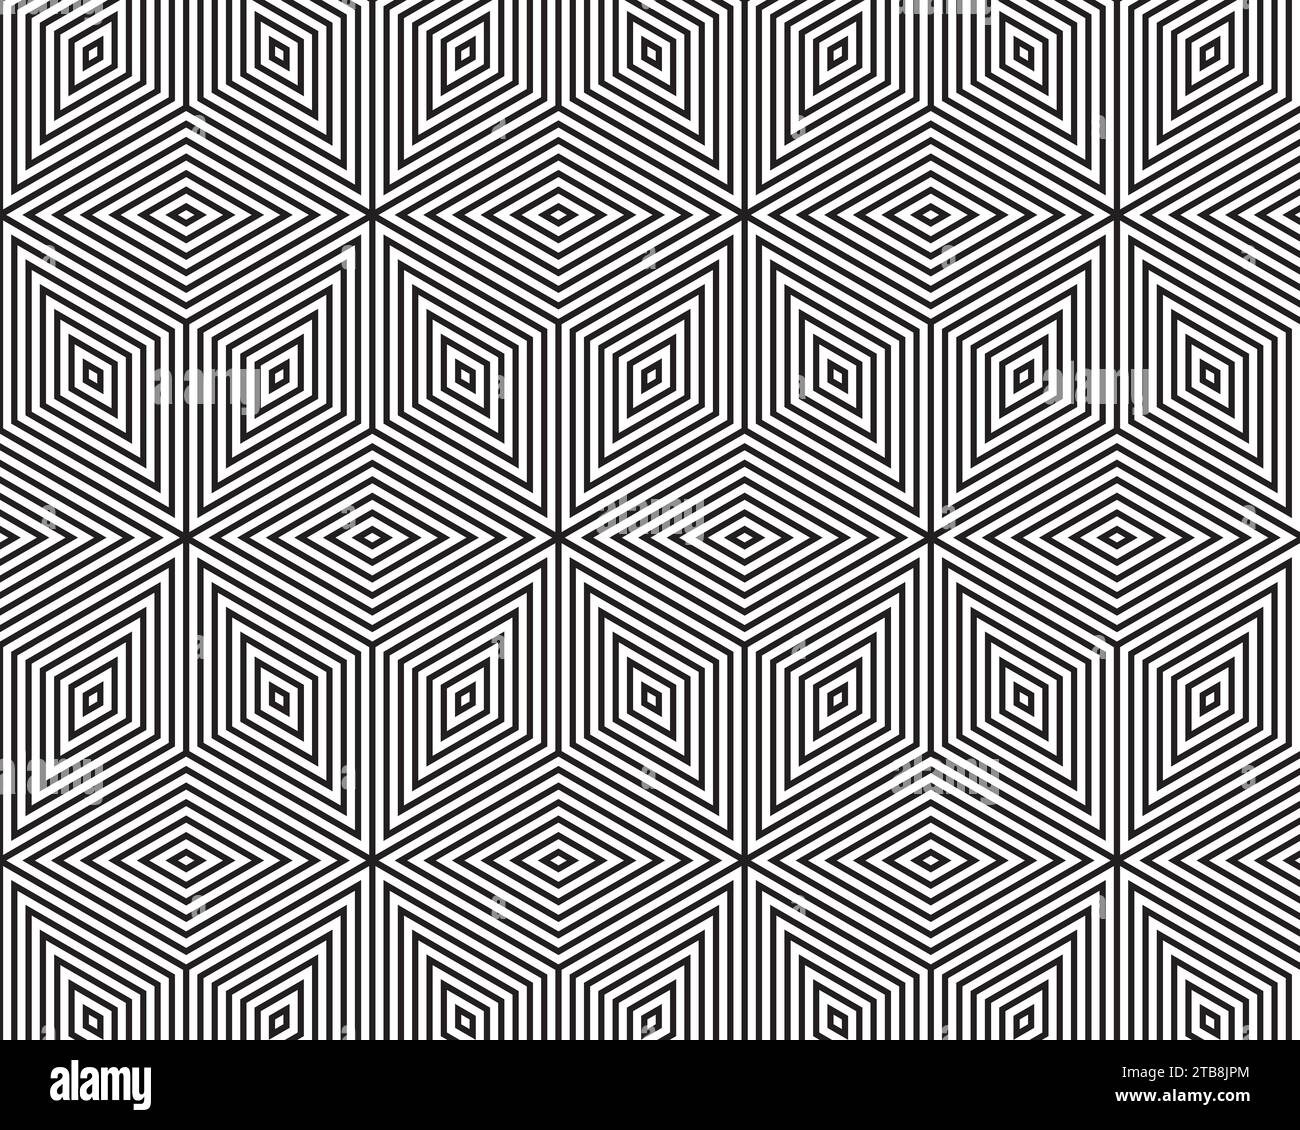 black and white spiral optical illusion background Stock Vector